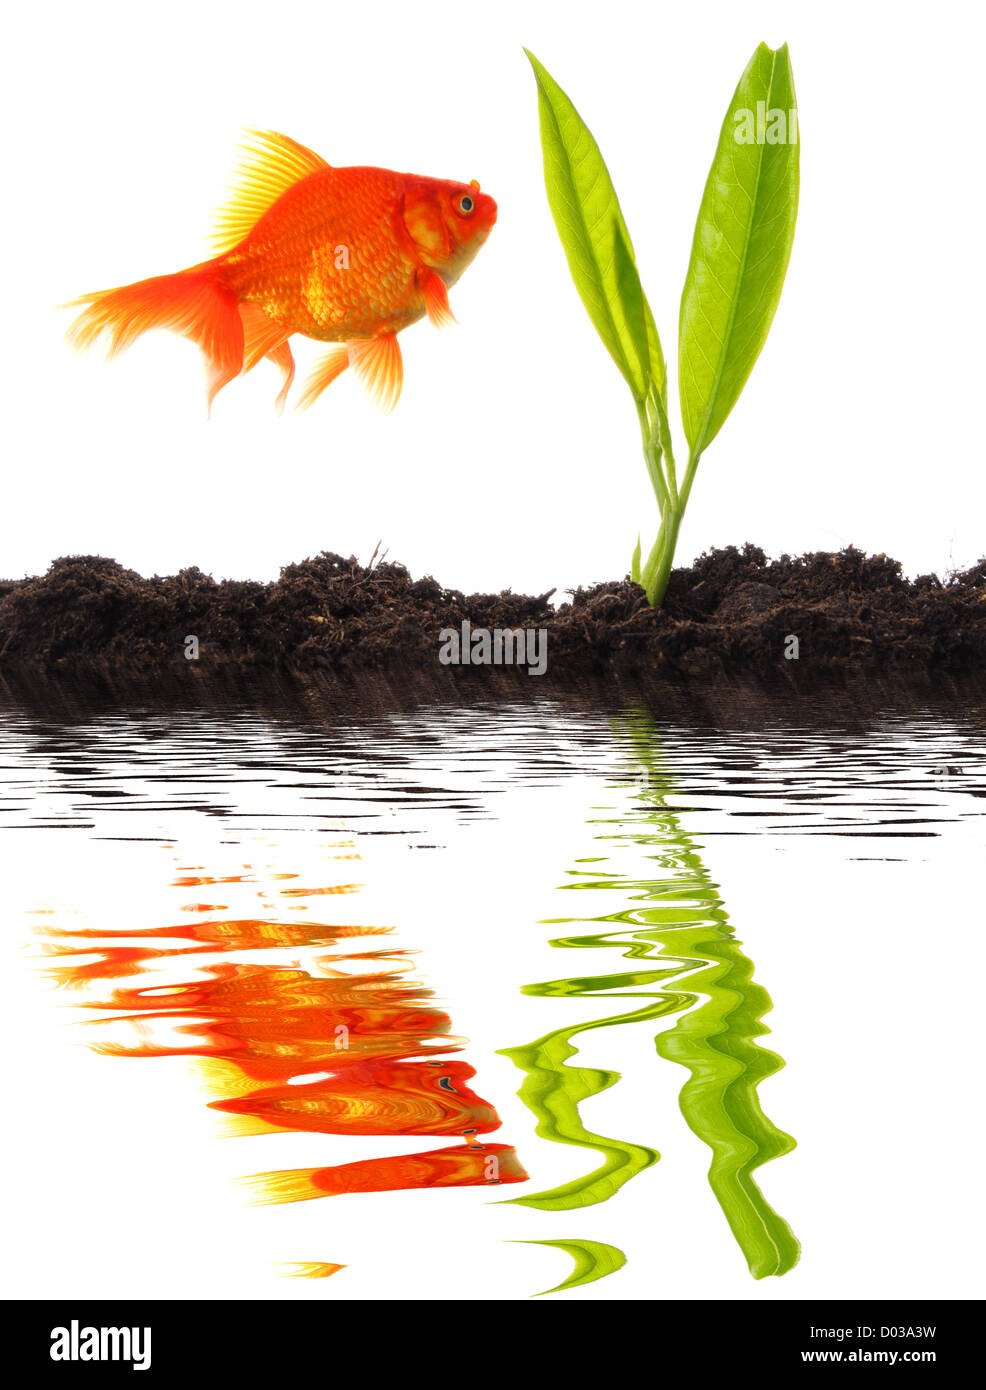 goldfish and young plant showing growth or nature concept Stock Photo